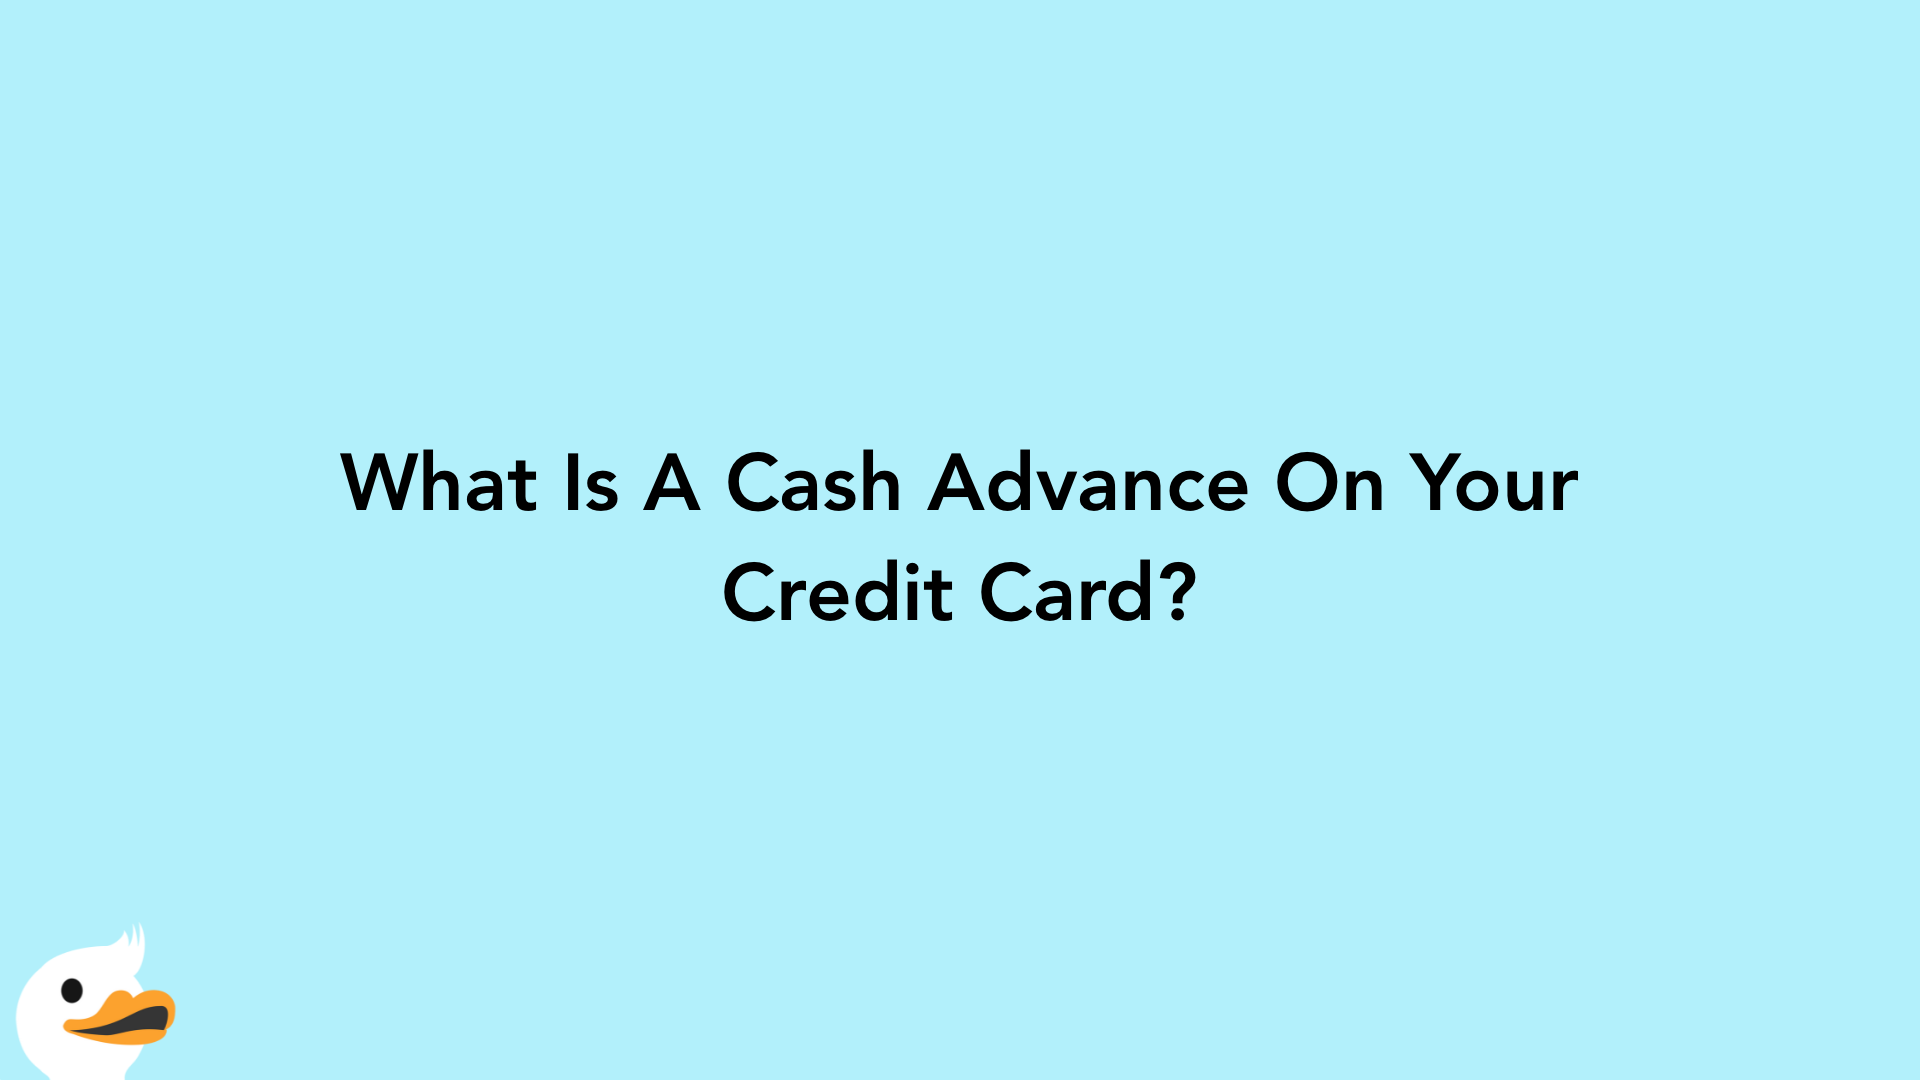 What Is A Cash Advance On Your Credit Card?